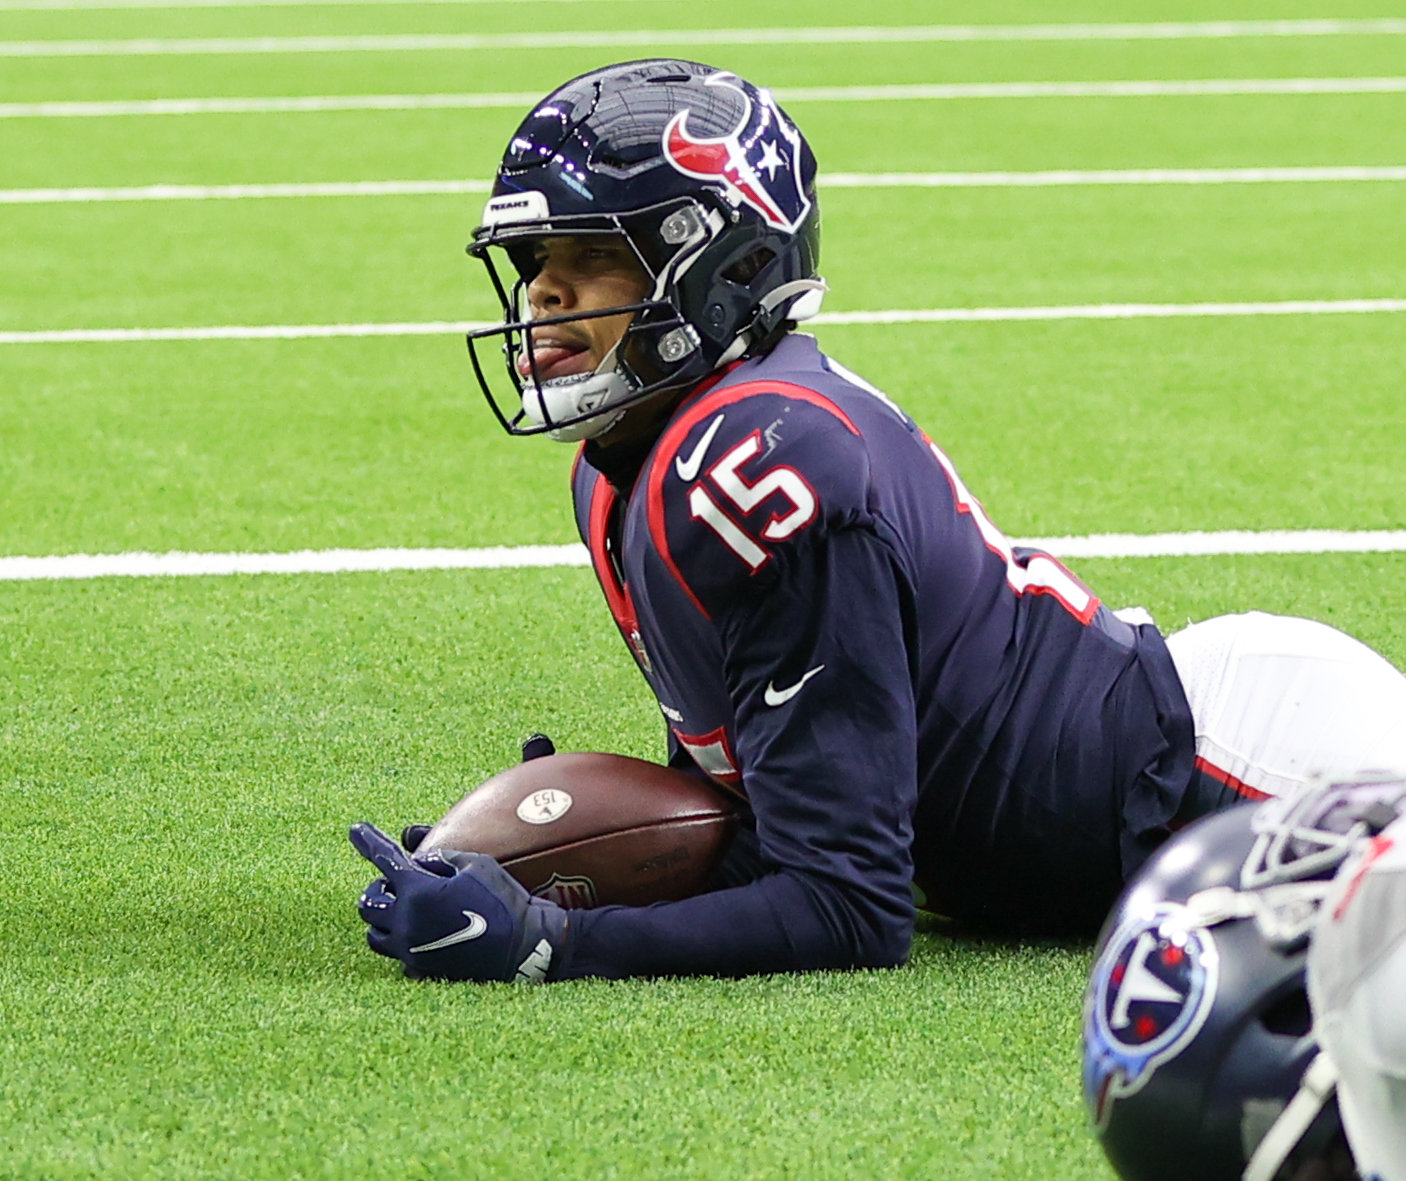 Houston Texans wide receiver Chris Moore (15) gestures after making a 28-yard touchdown catch in the third quarter of an NFL game between the Texans and the Titans on Jan. 9, 2022 in Houston, Texas. The Titans won, 28-25.